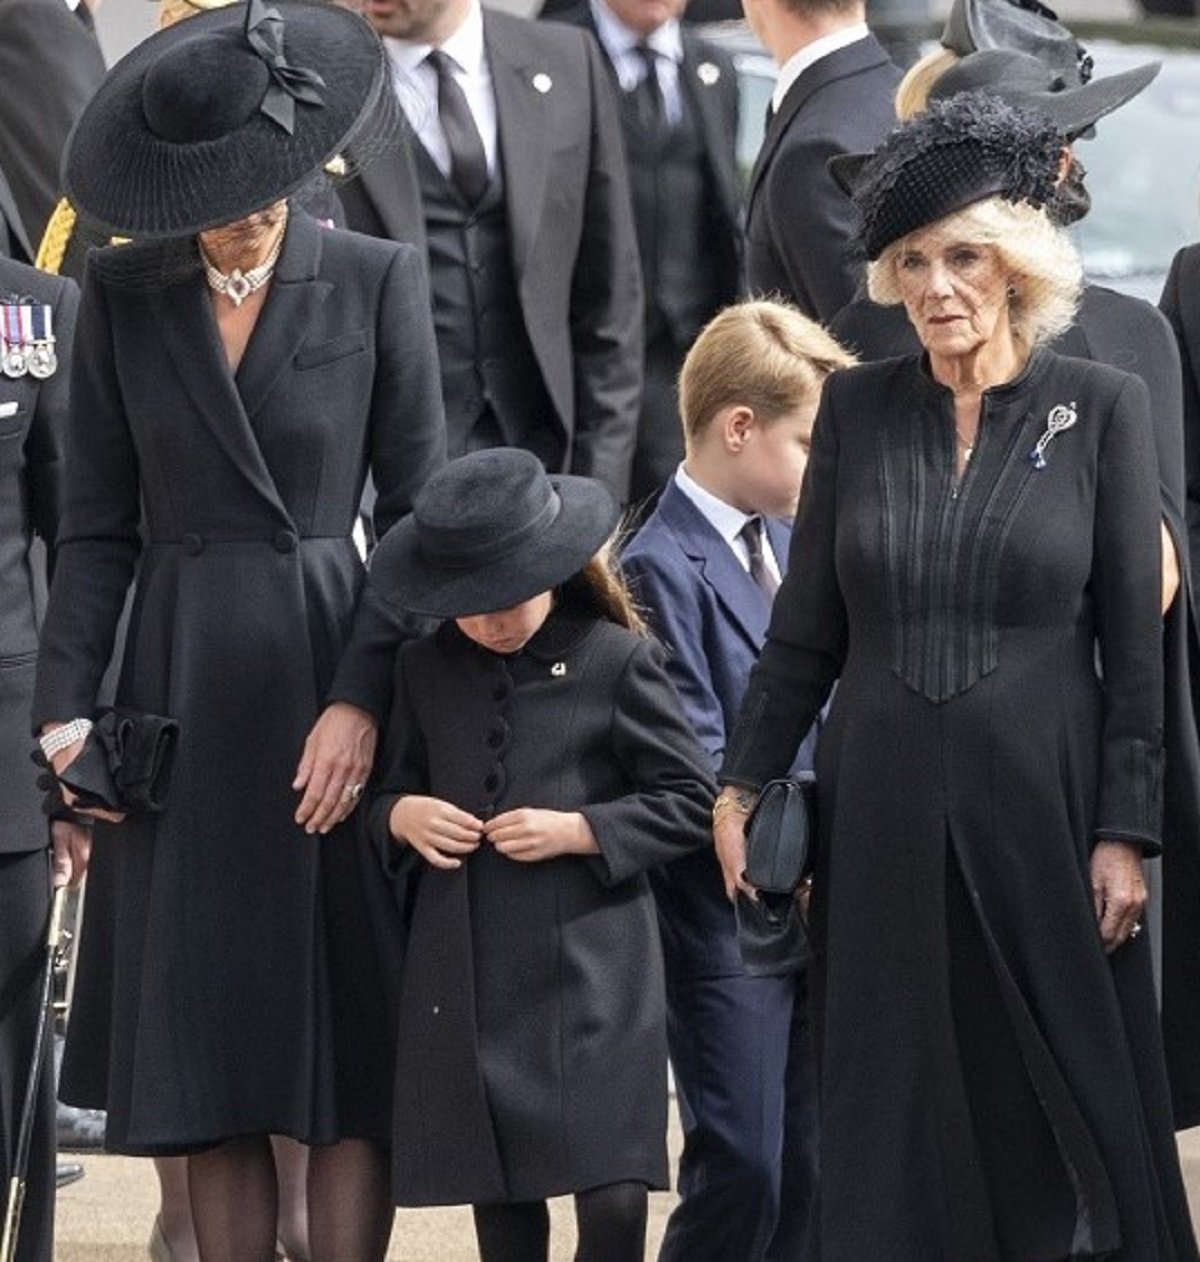 Kate Middleton, Princess Chatlotte, and Camilla Parker Bowles arrive at Wellington Arch from Westminster Abbey